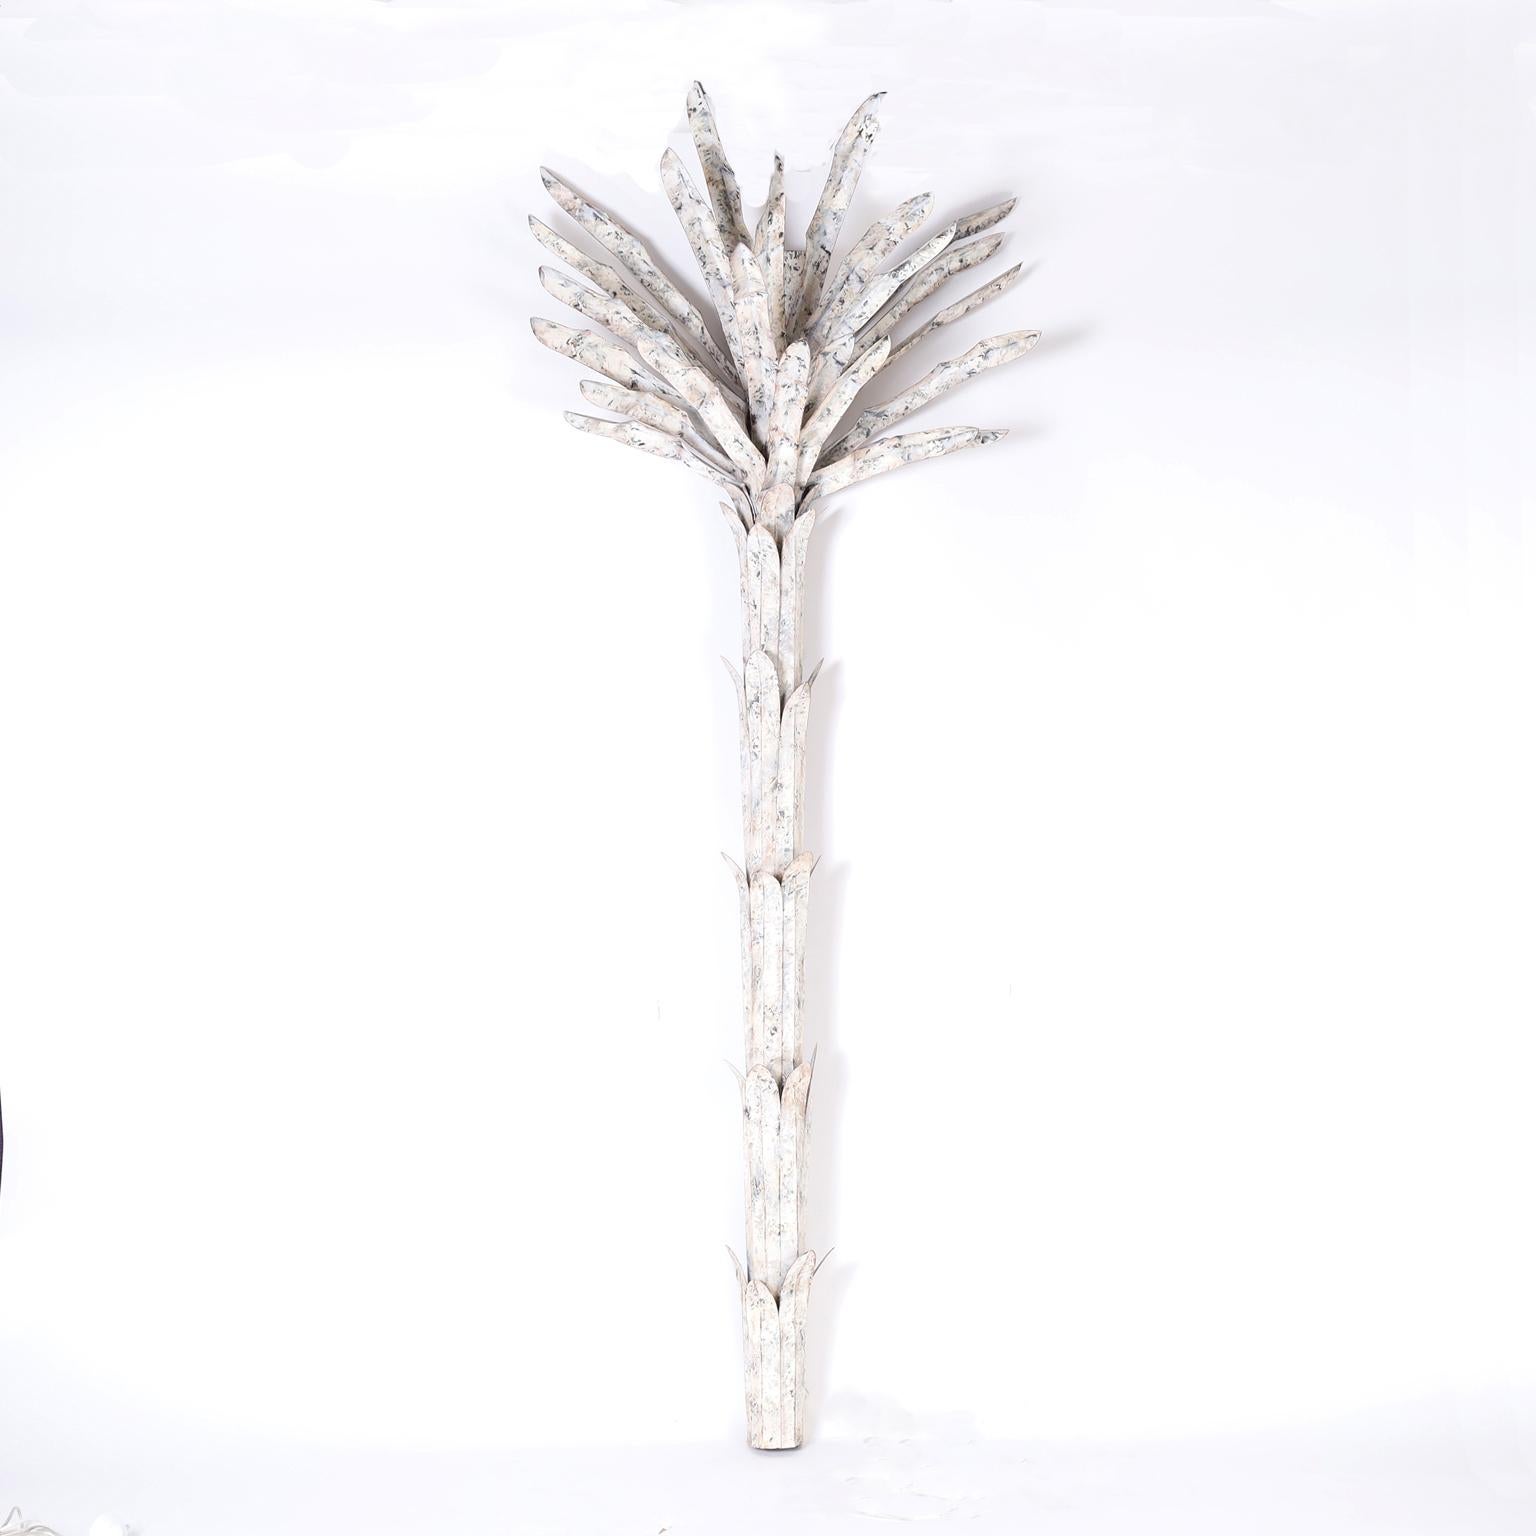 When is a floor lamp a sconce? When it is 94 inches tall and attaches to the wall. These palm trees are crafted in metal with perfectly distressed paint and a chic sculptural form.